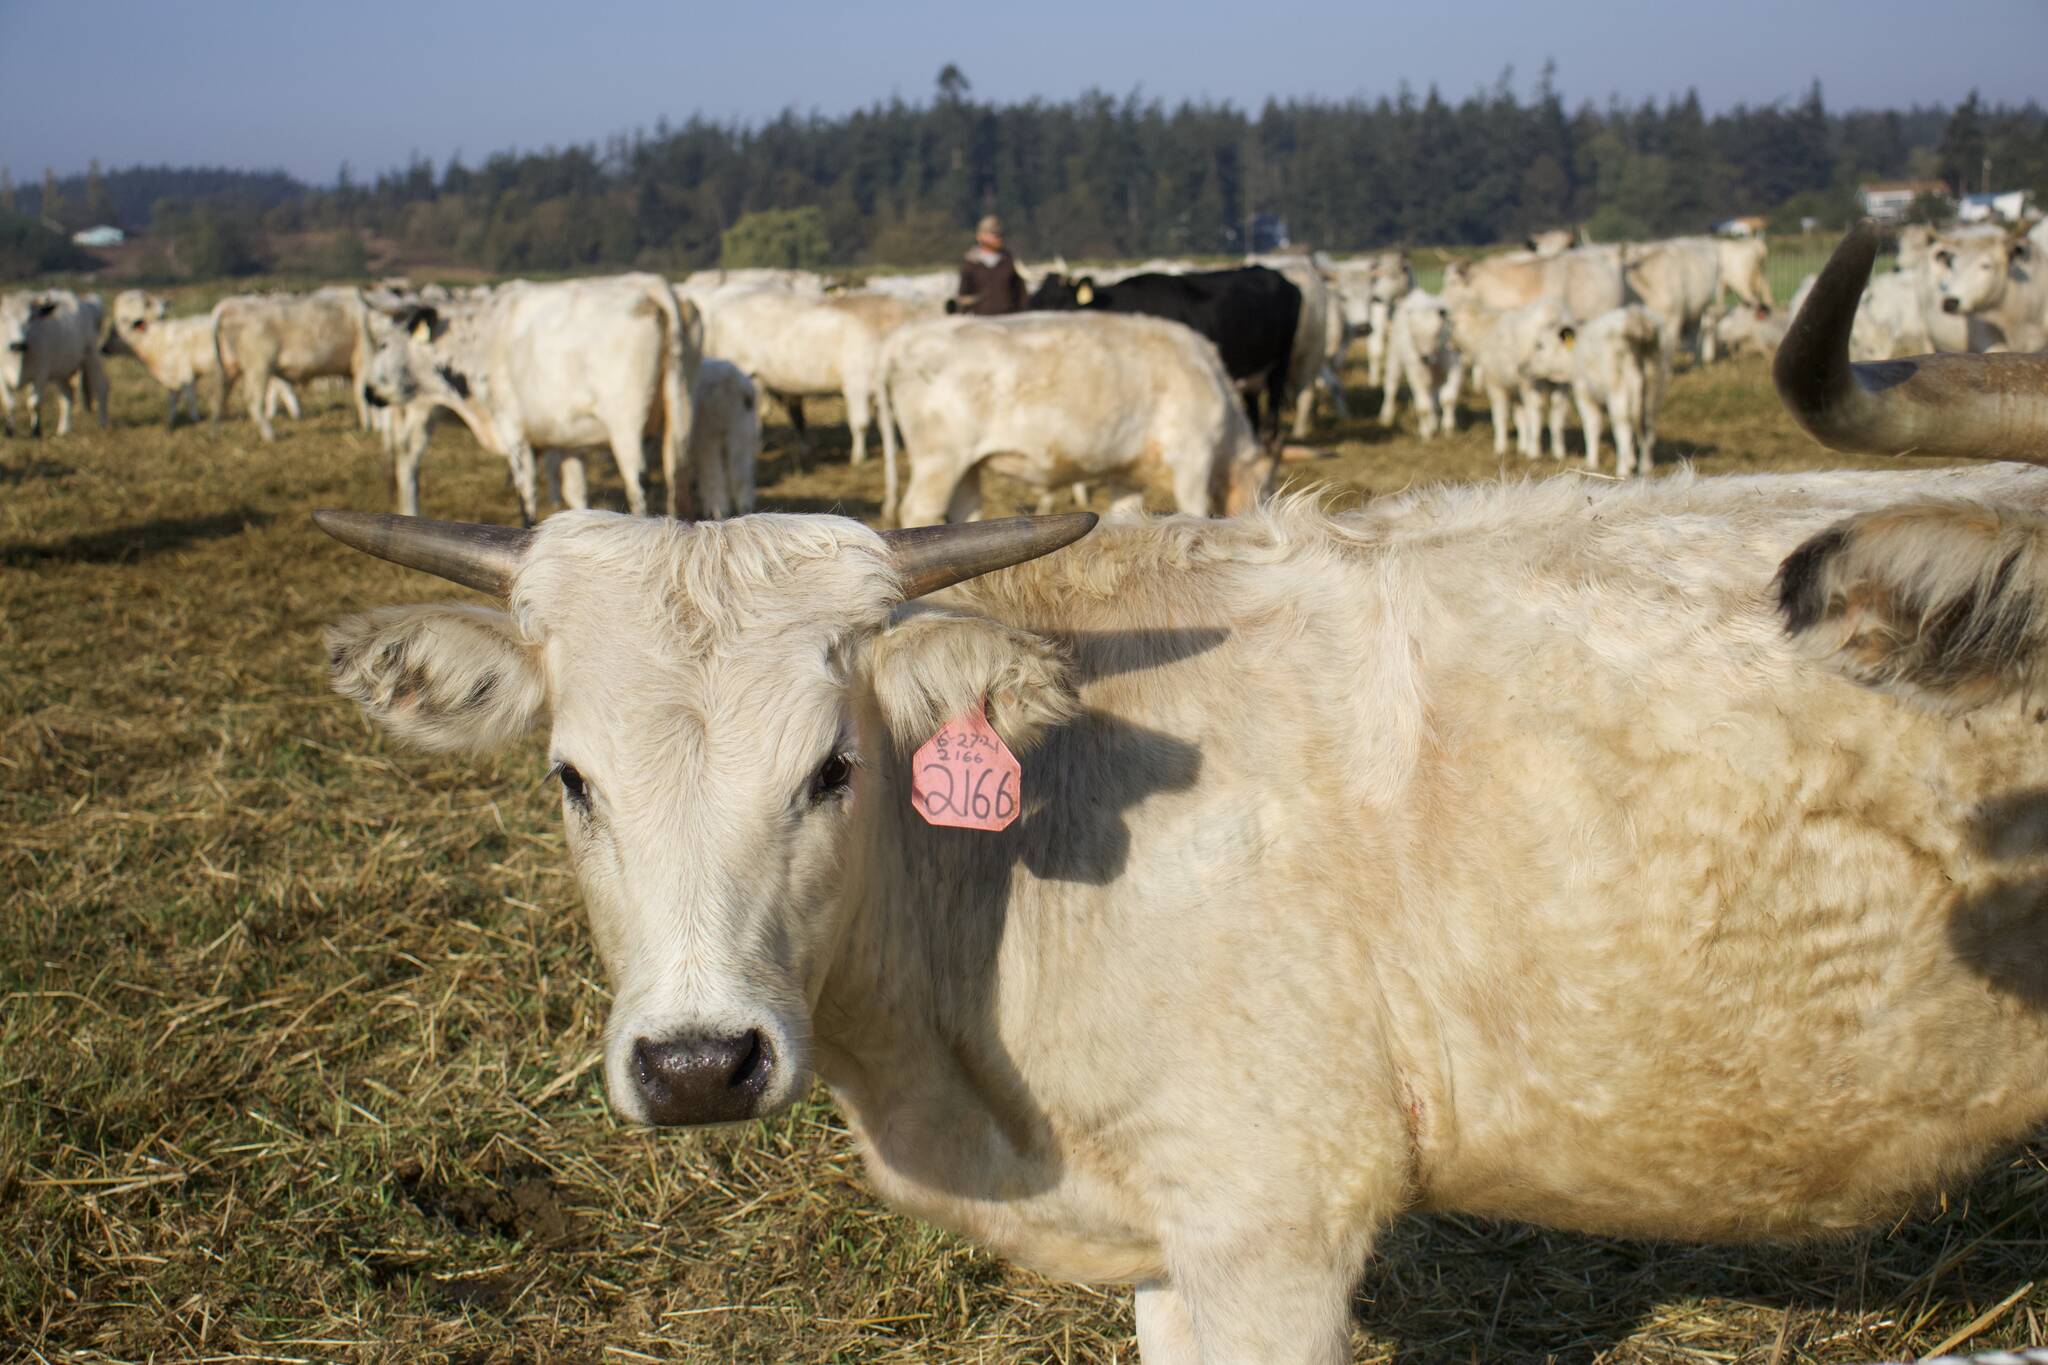 Photo by Rachel Rosen/Whidbey News-Times
All Ancient White Park Cattle have horns and almost all are completely white.